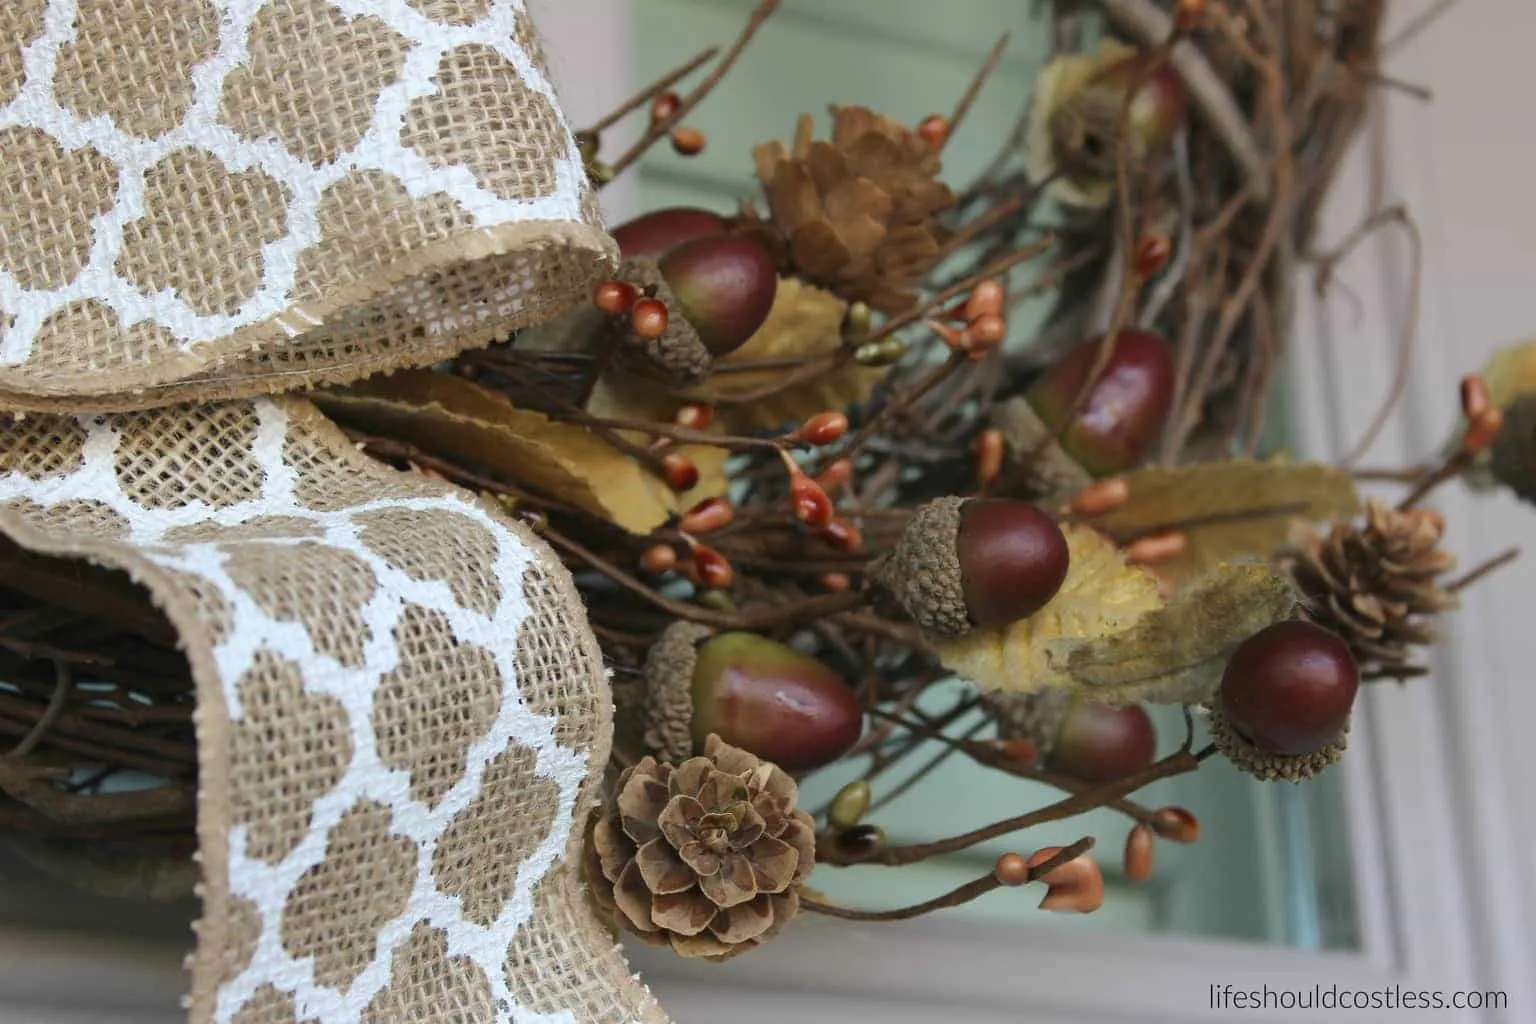 Rustic fall porch decor reveal. See this post and many more popular decor pins at lifeshouldcostless.com.